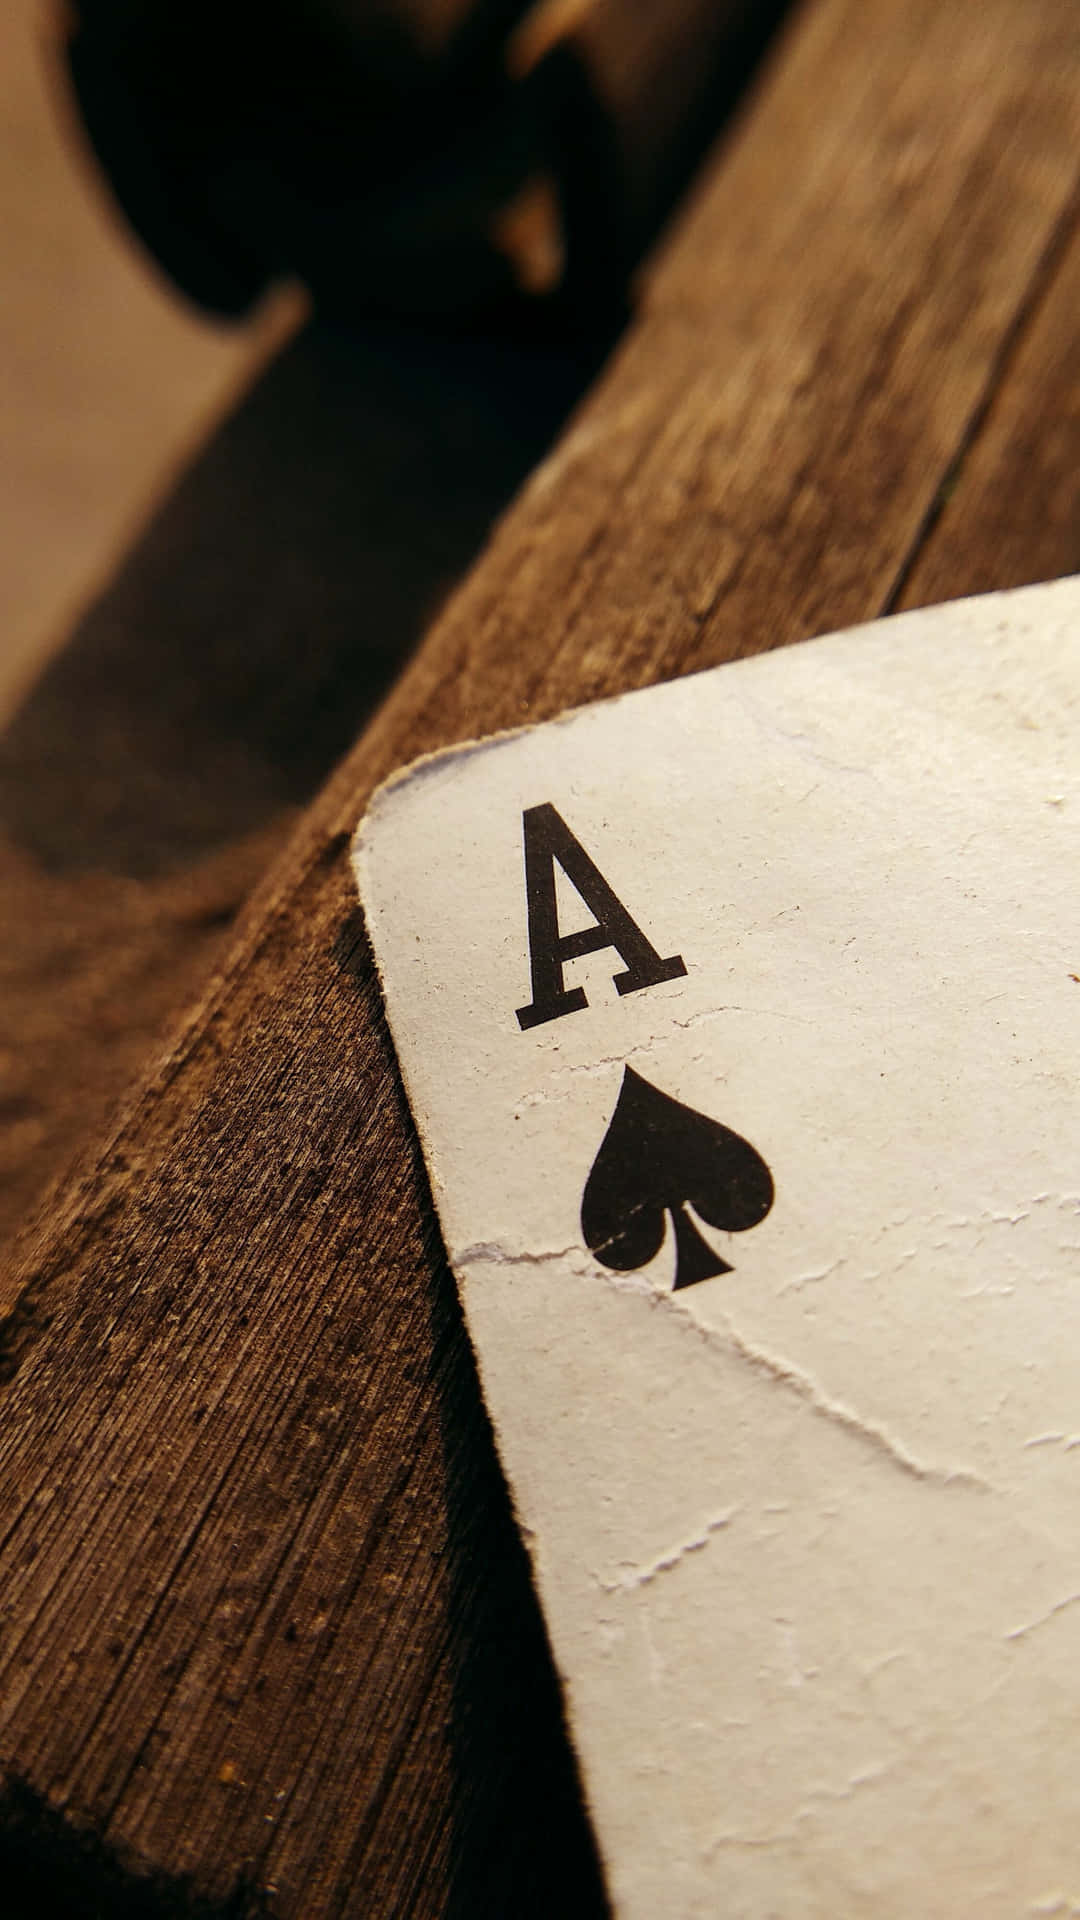 Aceof Spades Card Edgeon Wooden Table Wallpaper